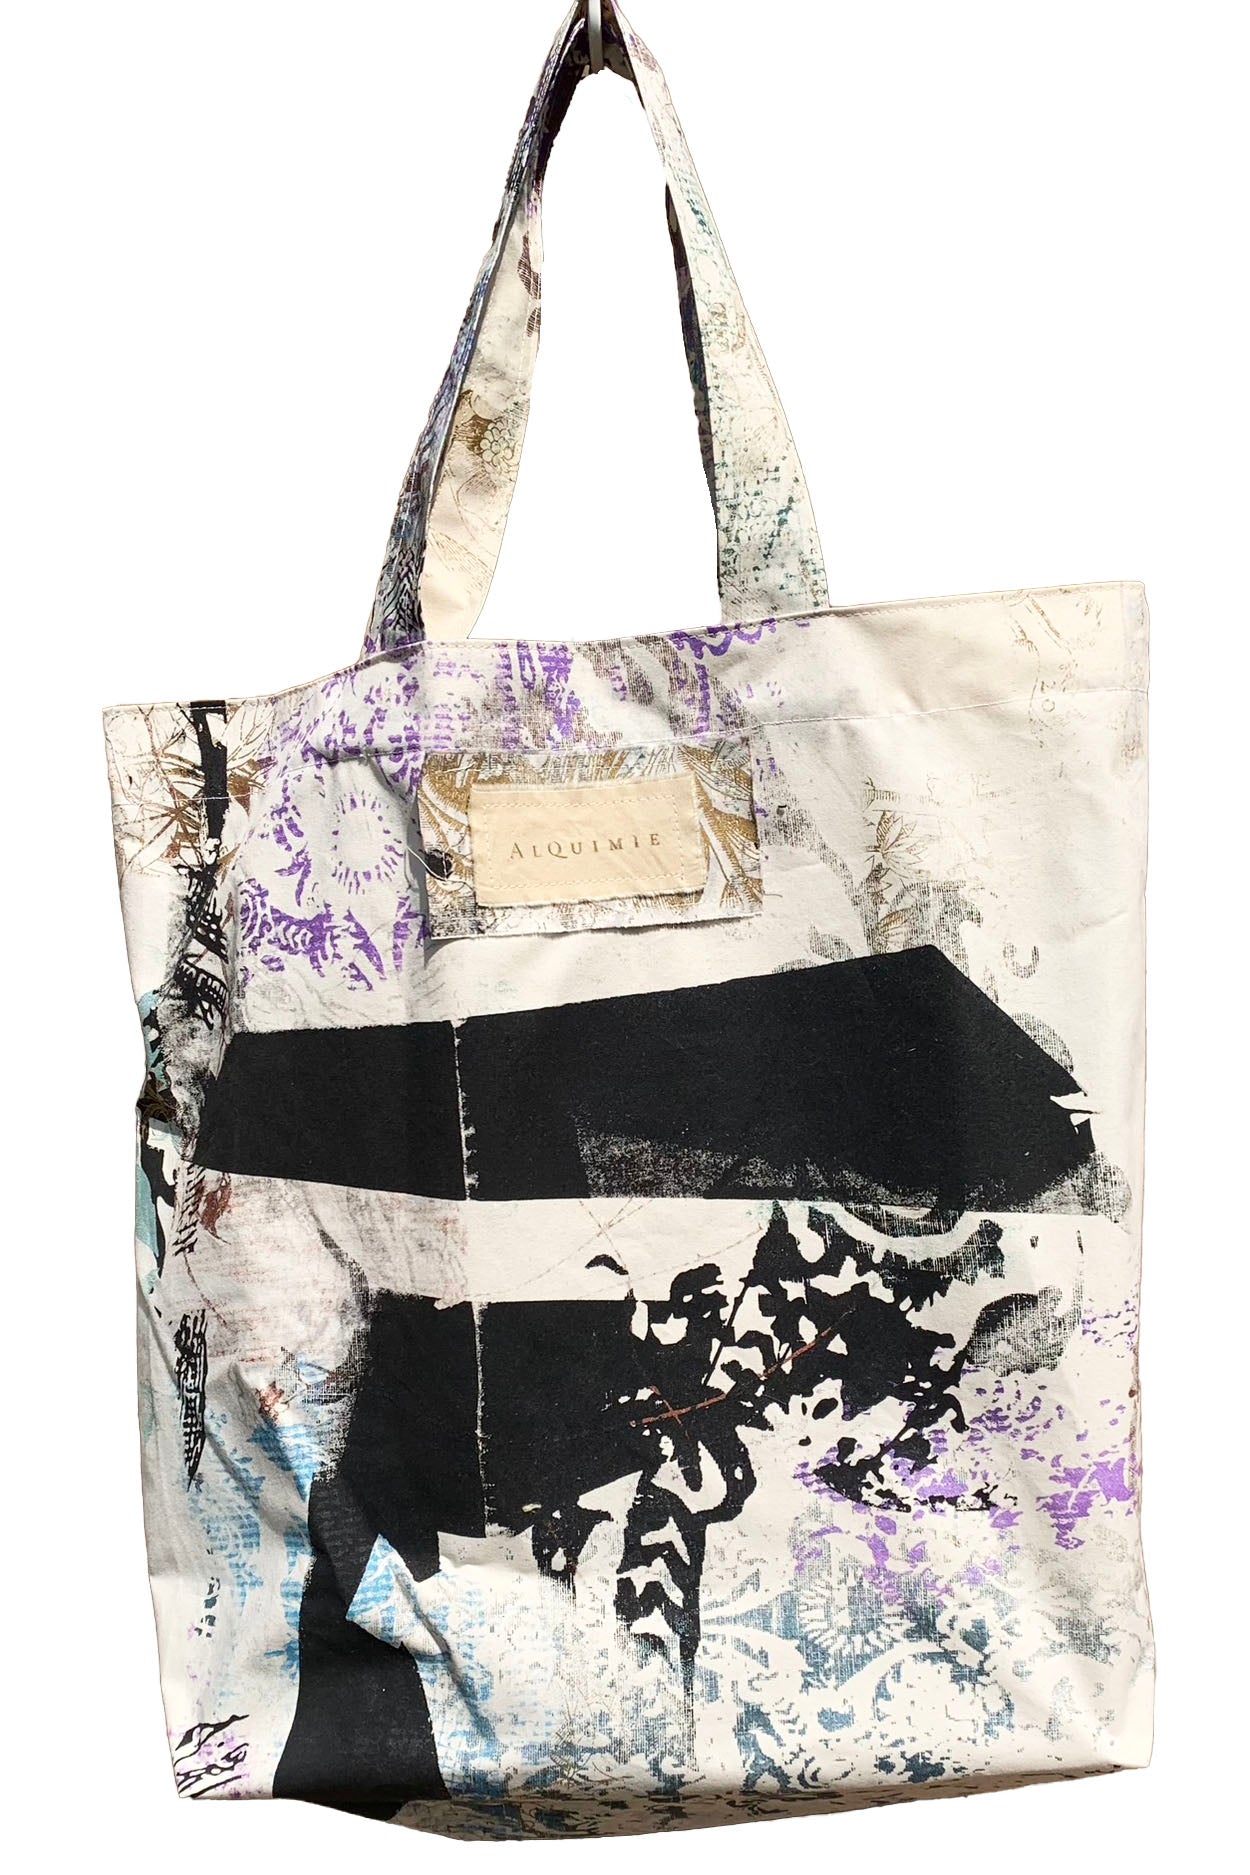 Hand Dyed & Printed Canvas Tote - Chaos Print on Natural